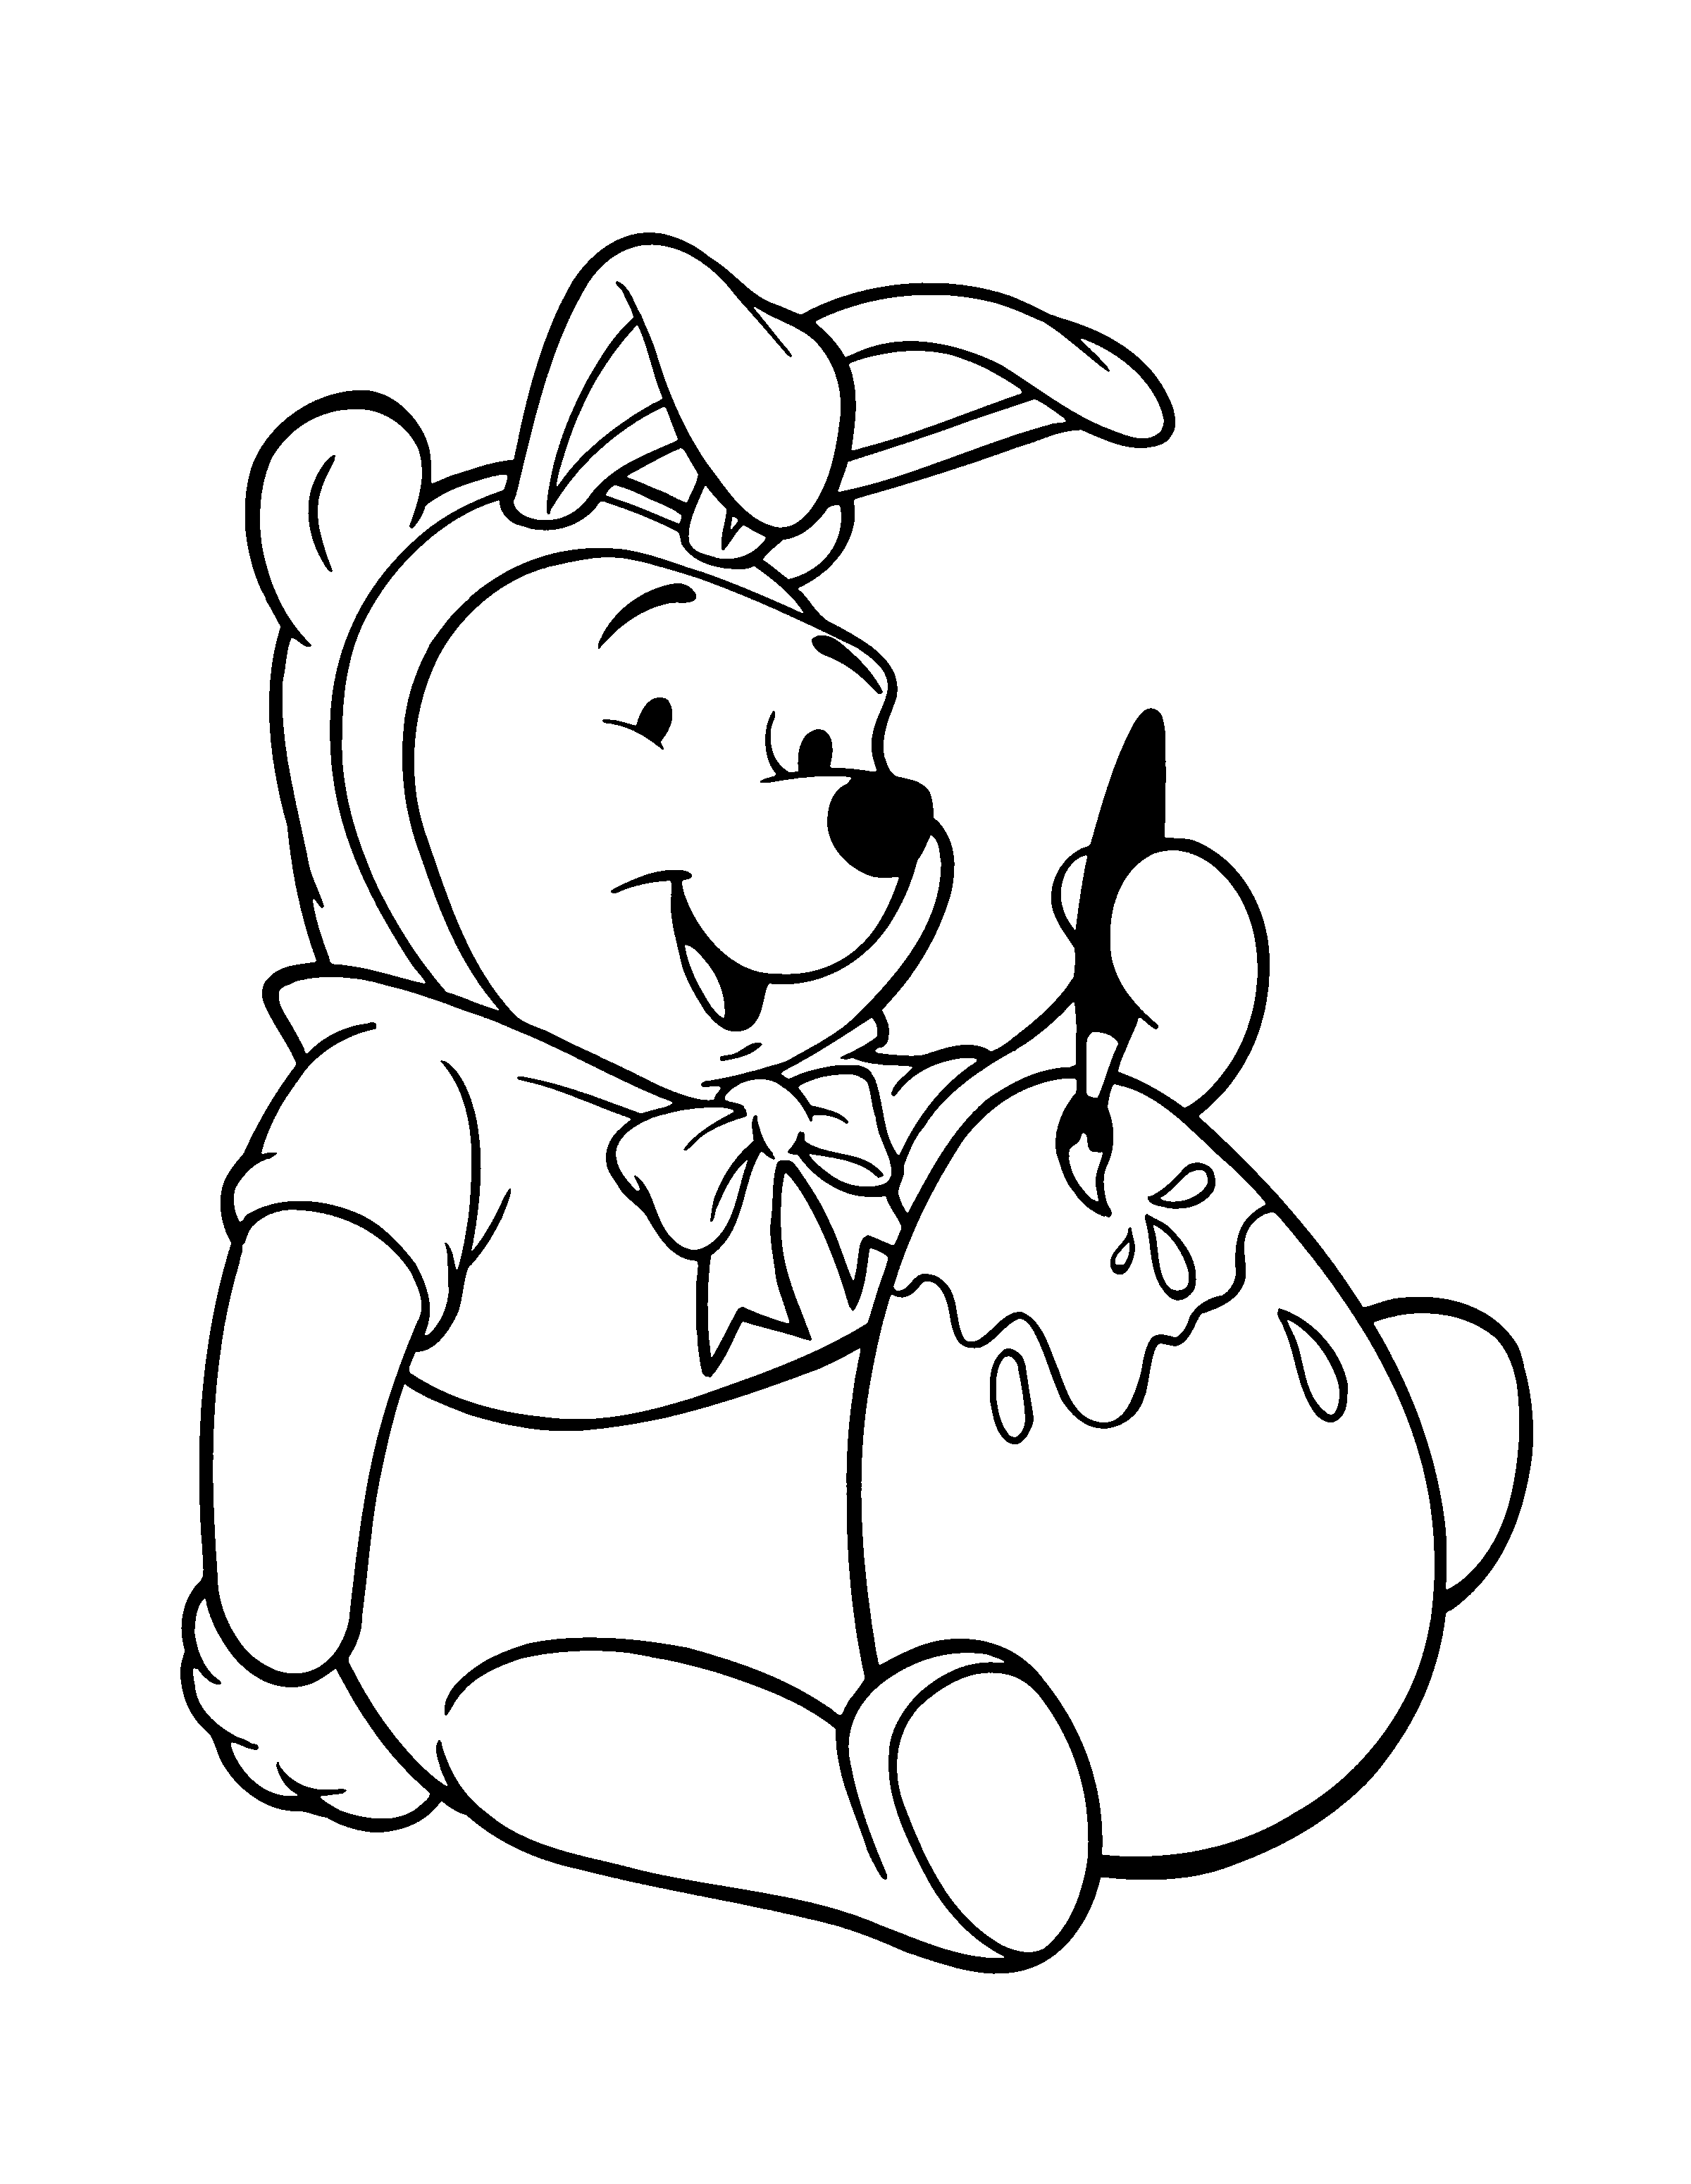 Coloring Page - Winnie the pooh coloring pages 63